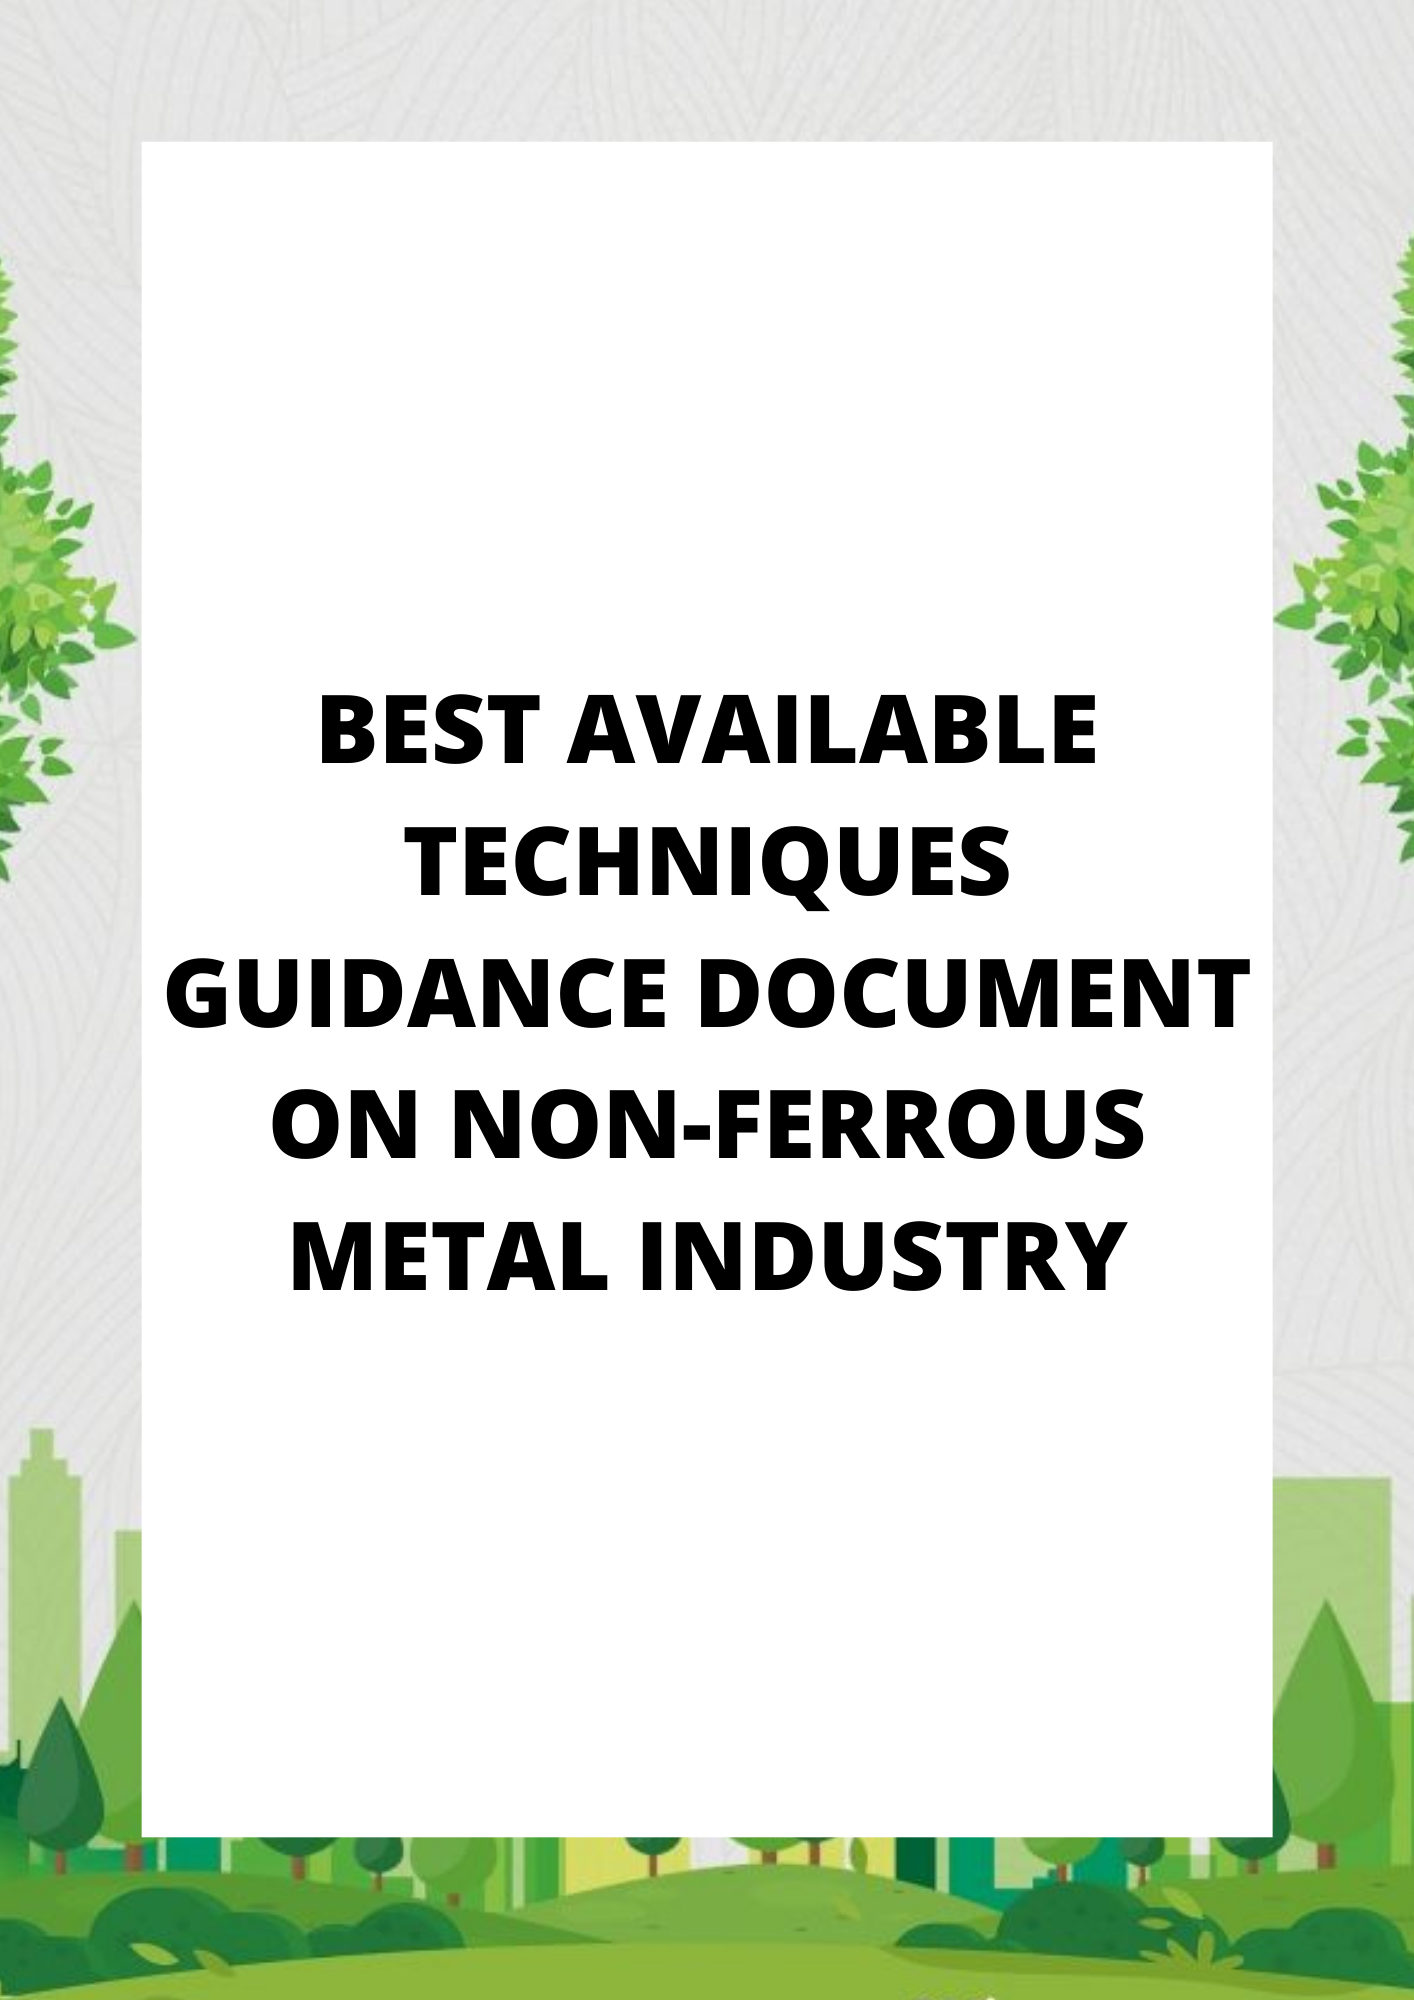 BEST AVAILABLE TECHNIQUES GUIDANCE DOCUMENT ON NON-FERROUS METAL INDUSTRY